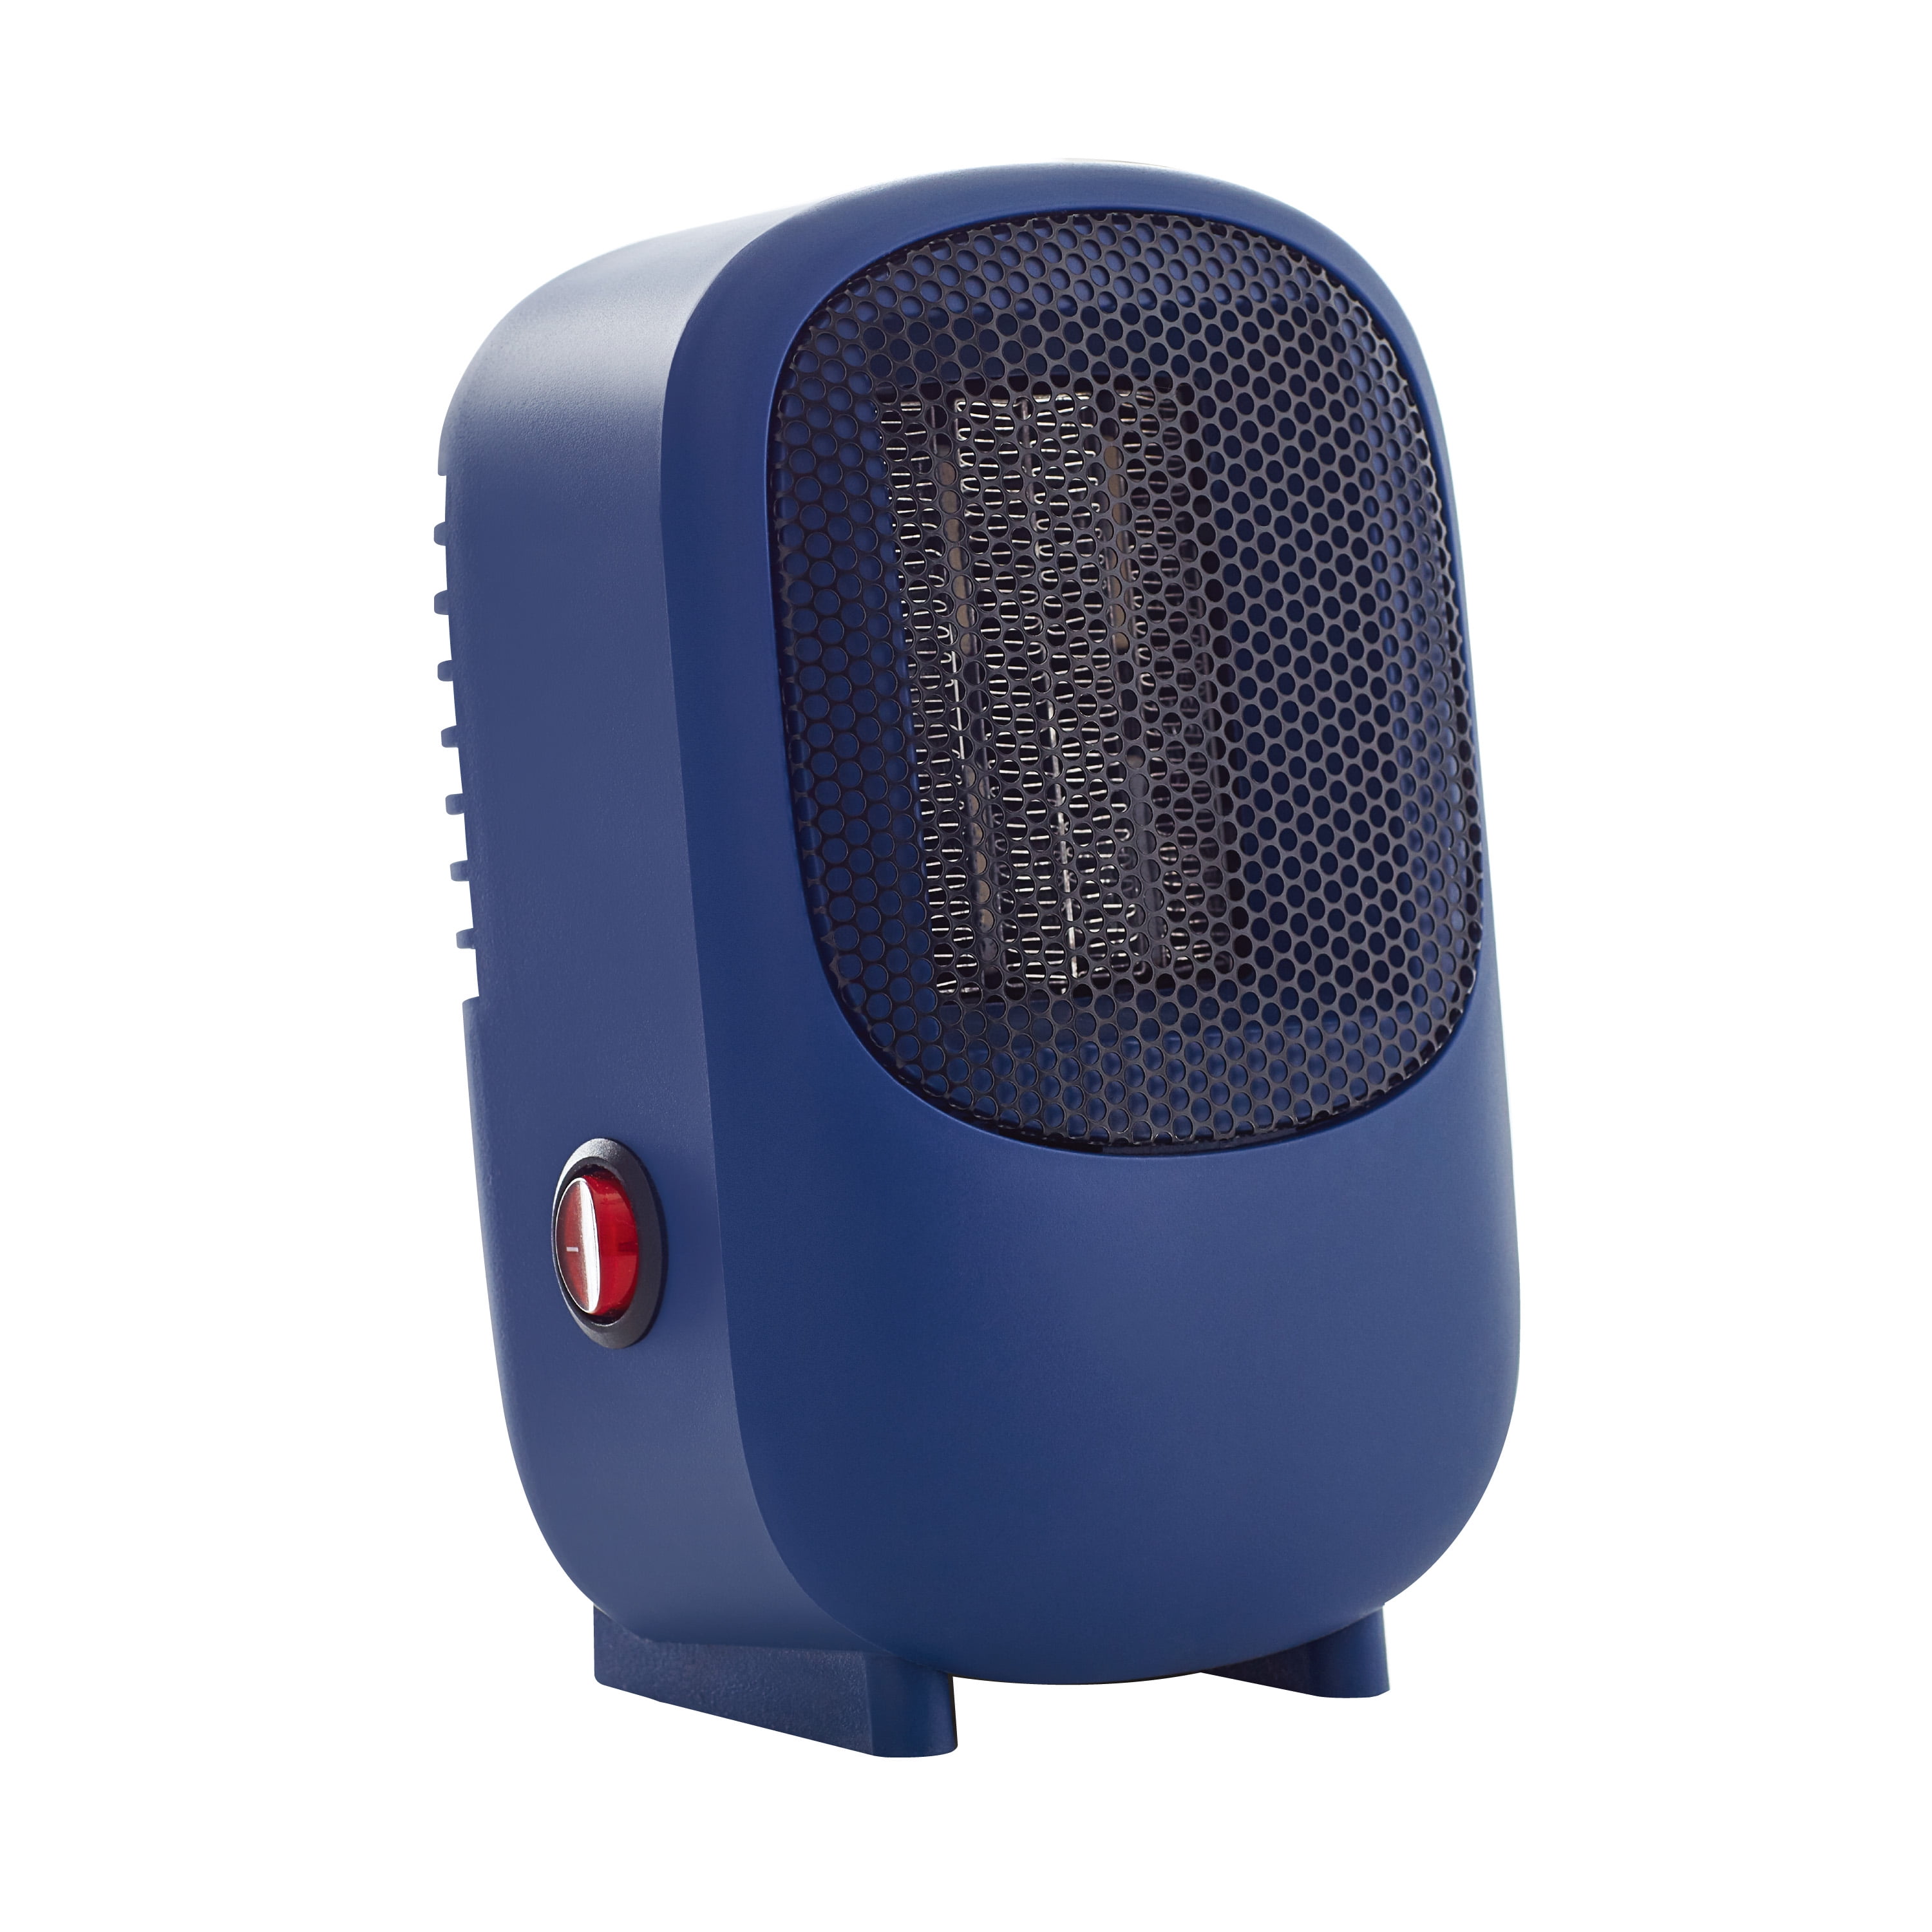 Mainstays Personal Mini Electric Ceramic Heater 350W Indoor Washed Blue